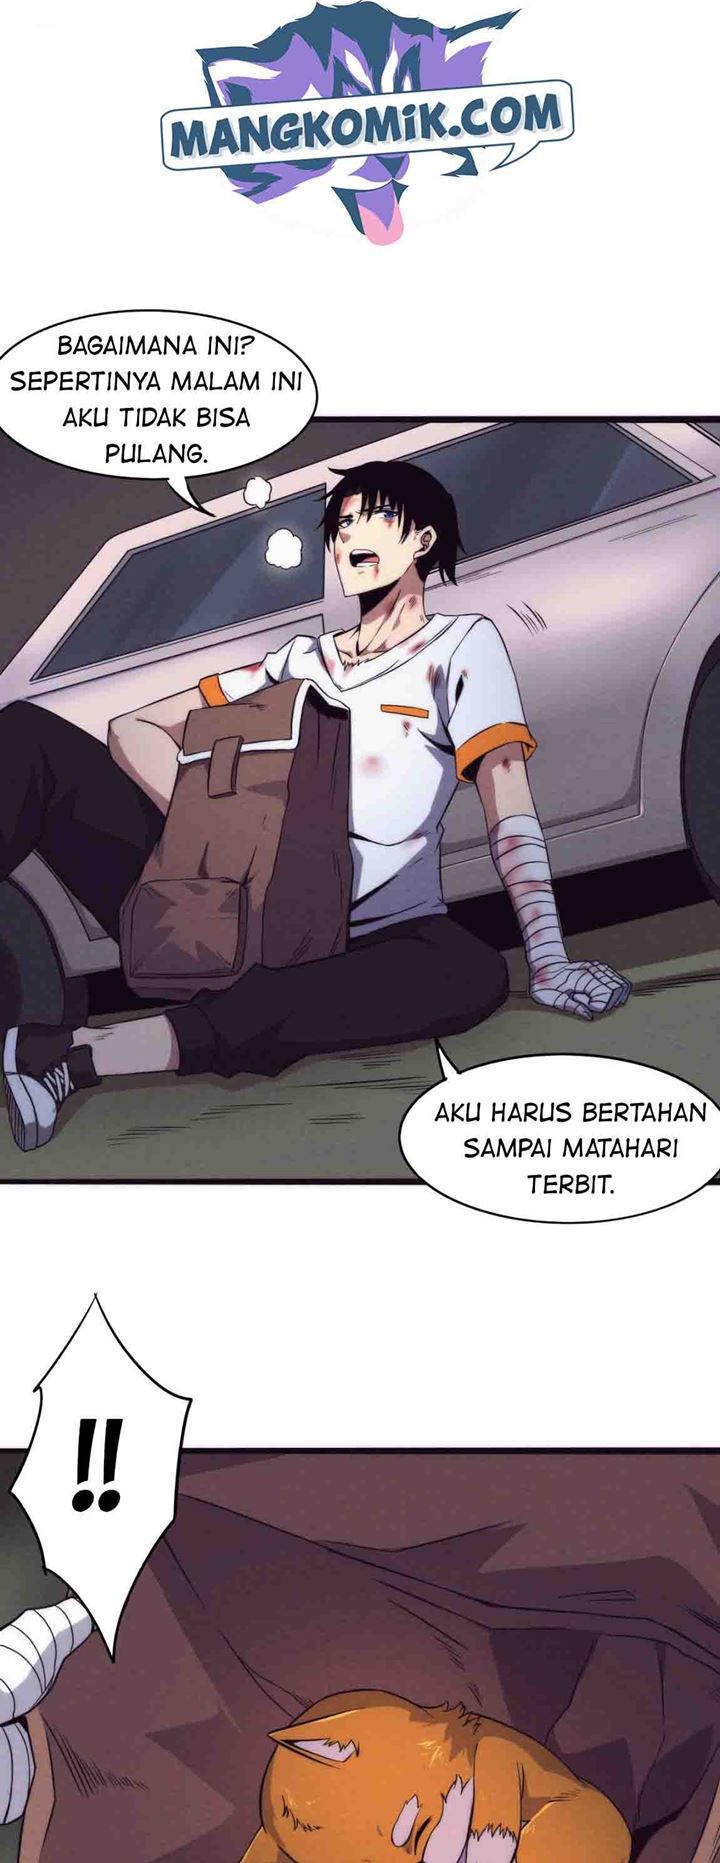 Evolution frenzy Chapter 11 bahasa indoensia